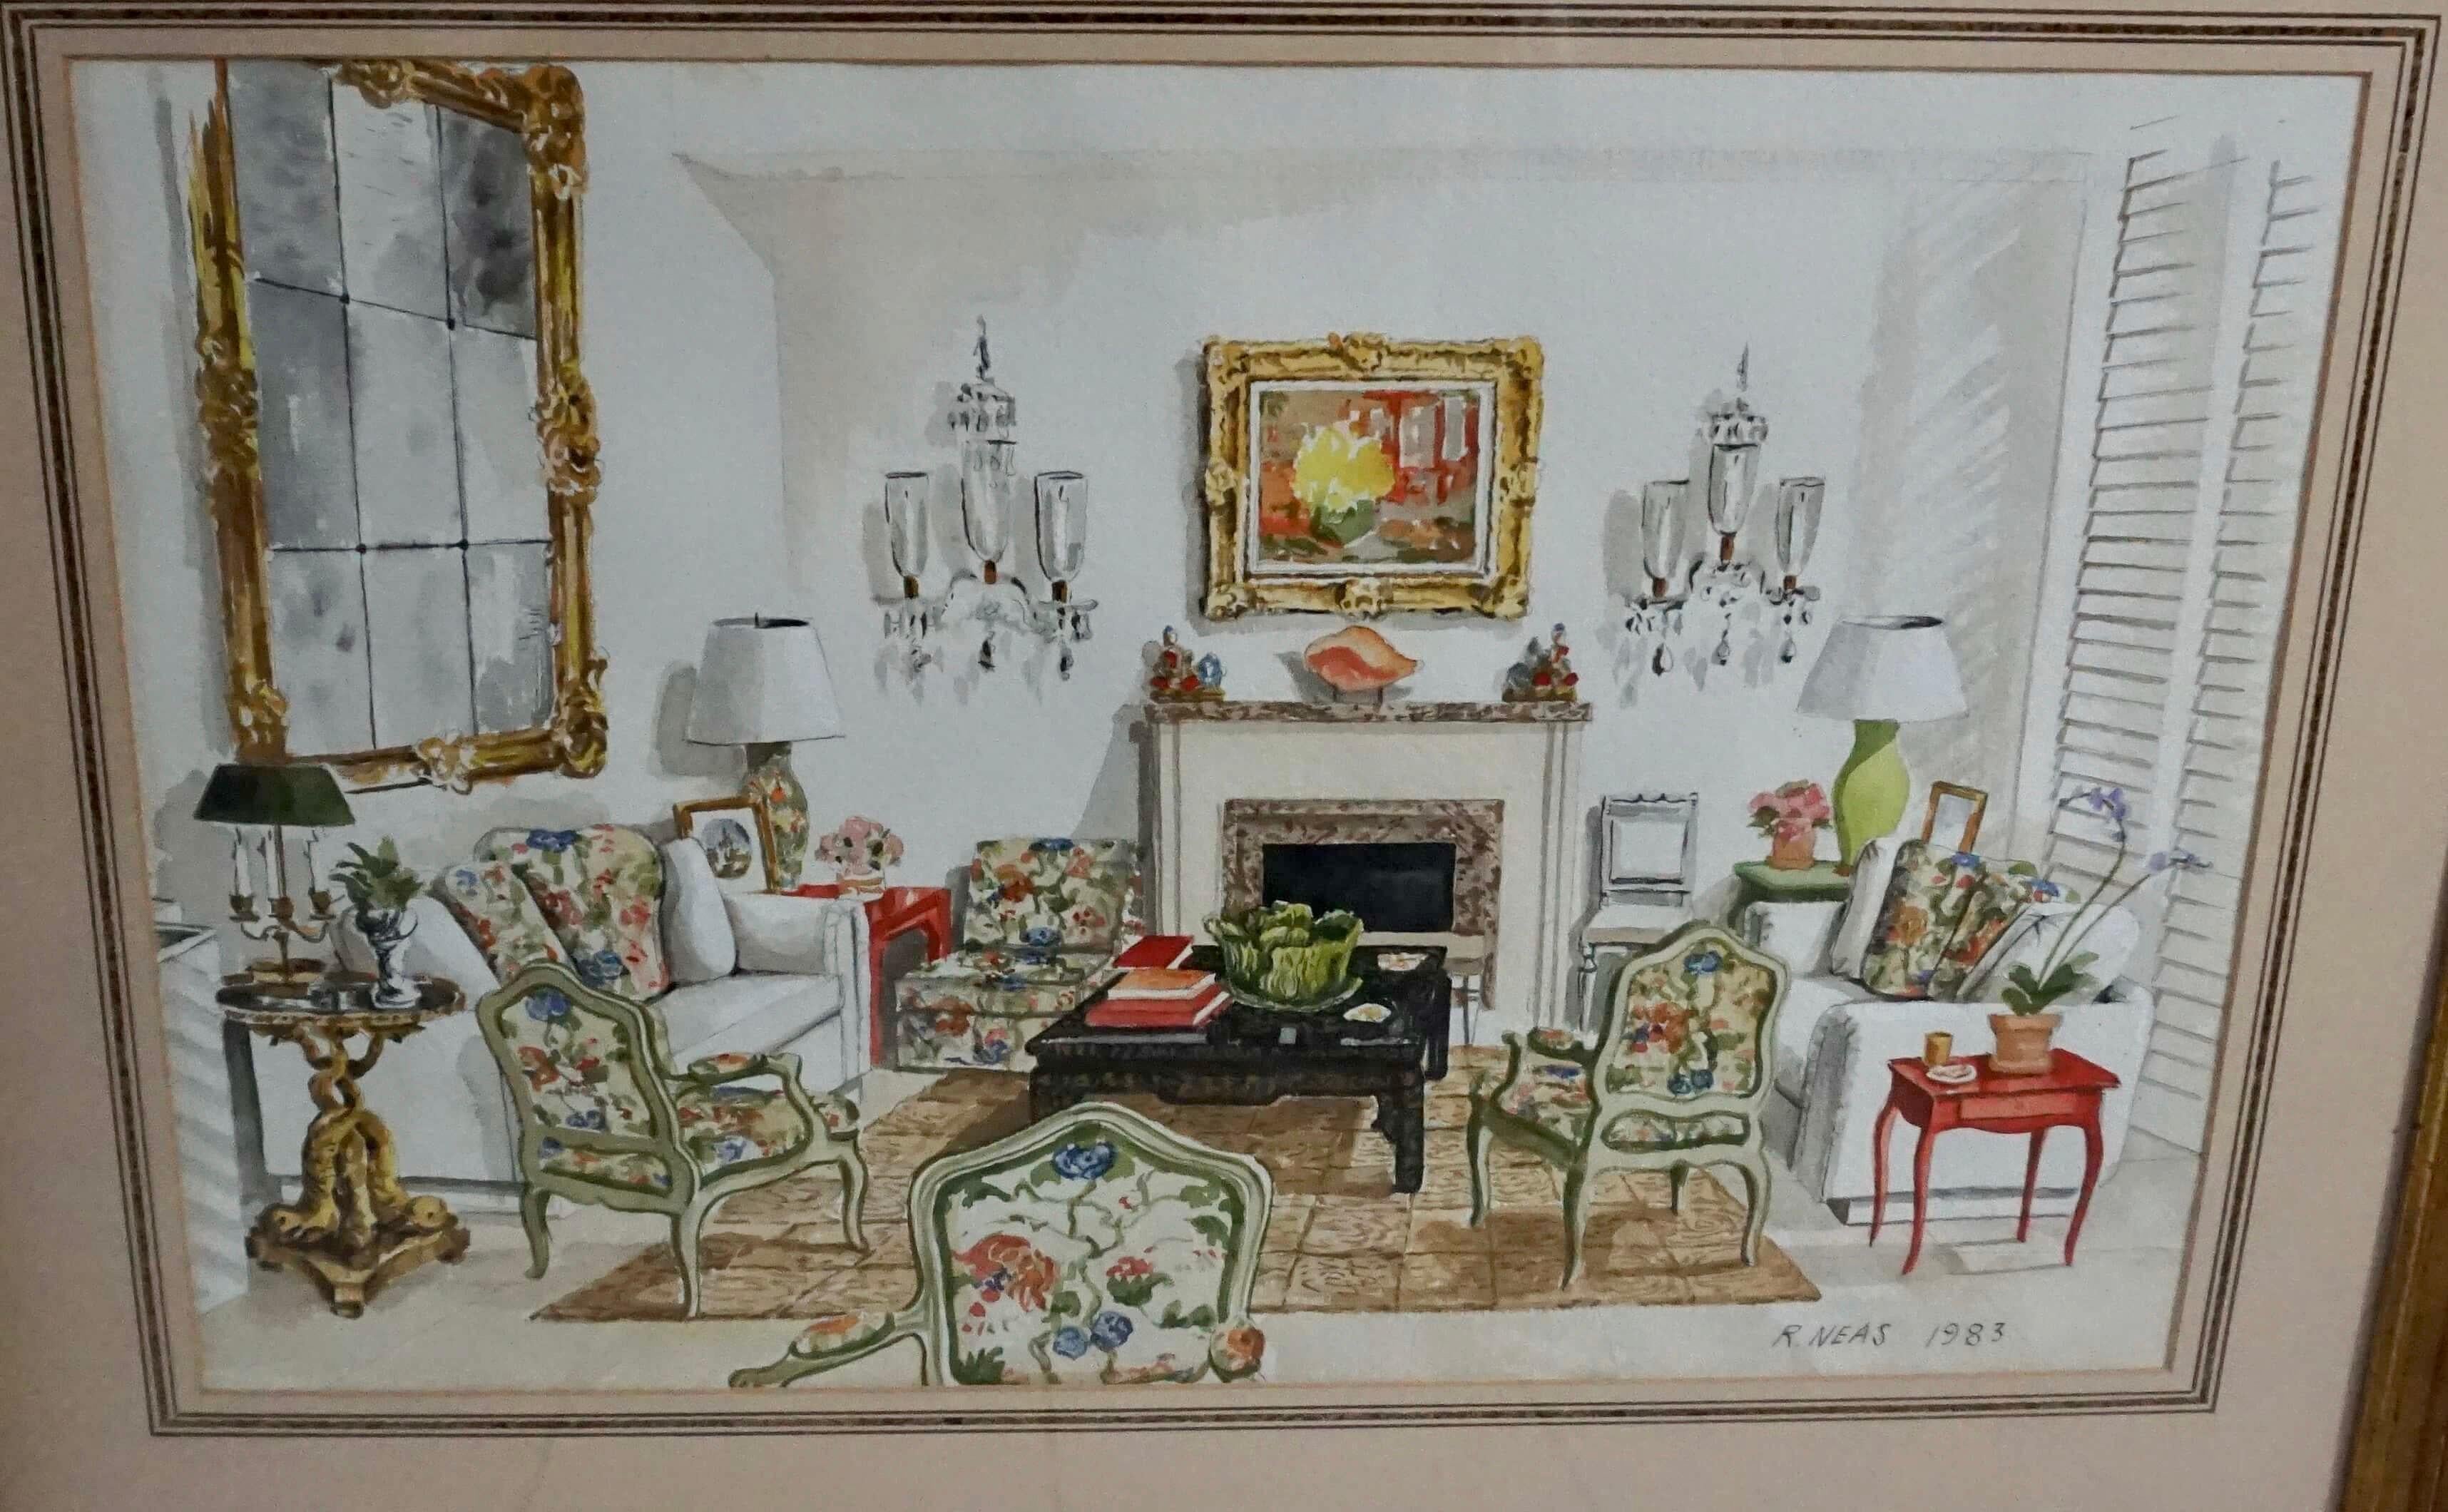 Interior illustration, study, or rendering in watercolor on paper of a drawing or living room by the renowned late New York City interior designer Richard Lowell Neas signed and dated 1983 and presented as originally French matted and giltwood